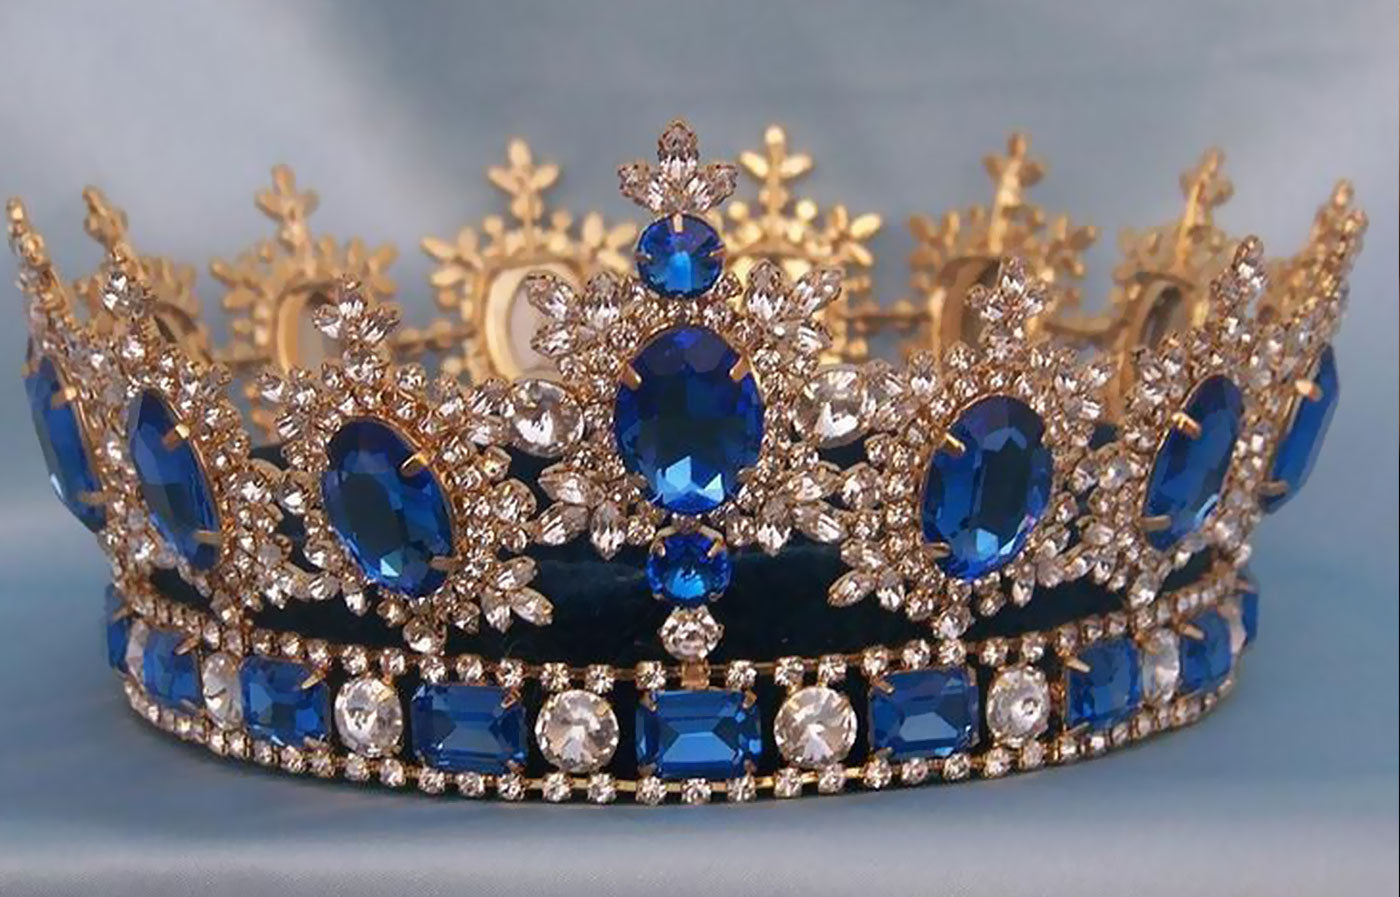 Vintage Baroque Regal Blue Sapphire Crown - Jaw-Dropping Splendor - The Legacy of Sapphire Jewelry in Royalty – Saratti